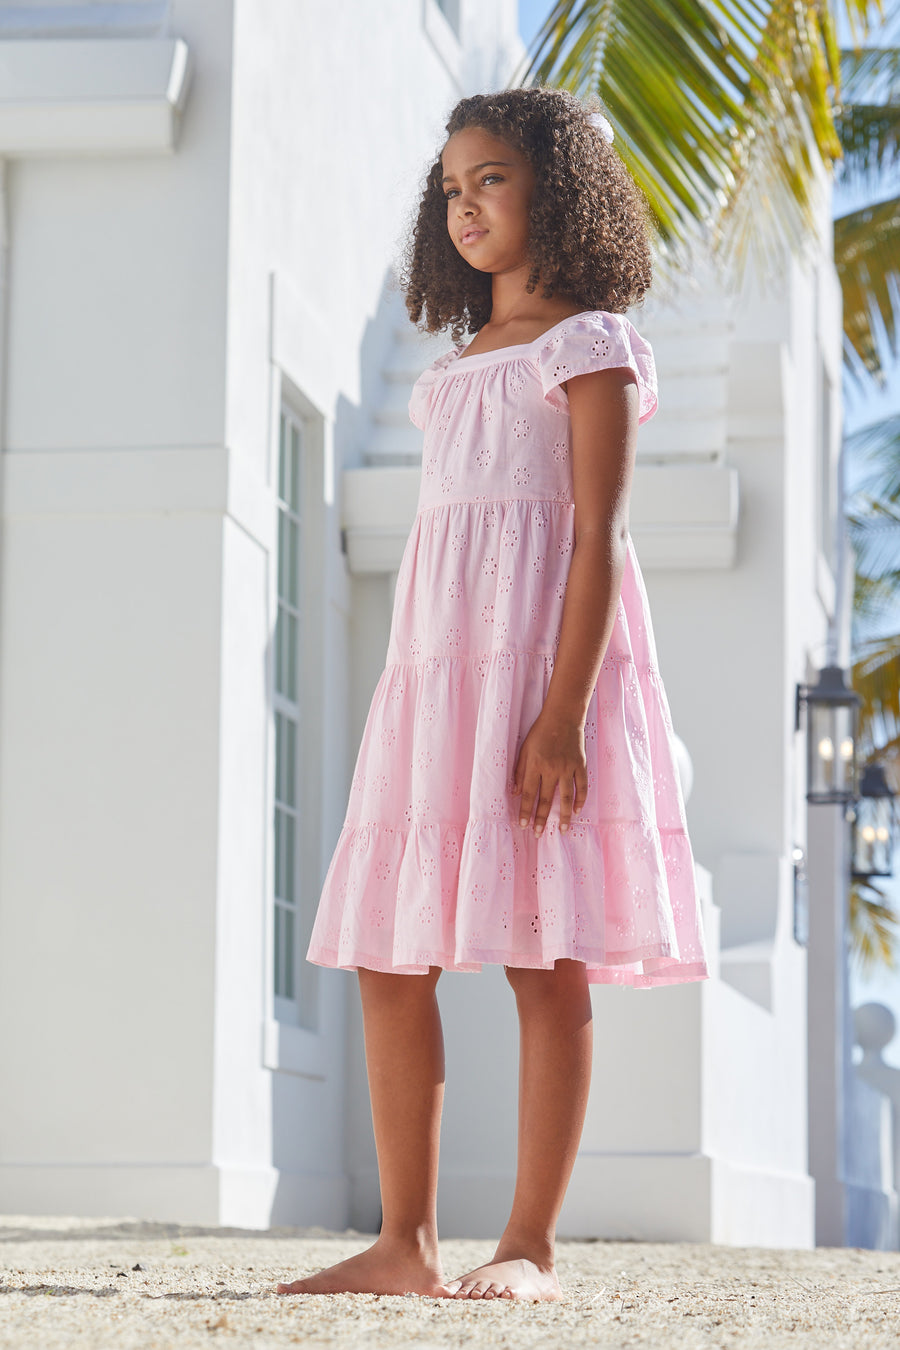 Little English traditional children's clothing, girl's casual tiered eyelet dress in pink with flutter sleeve for Spring